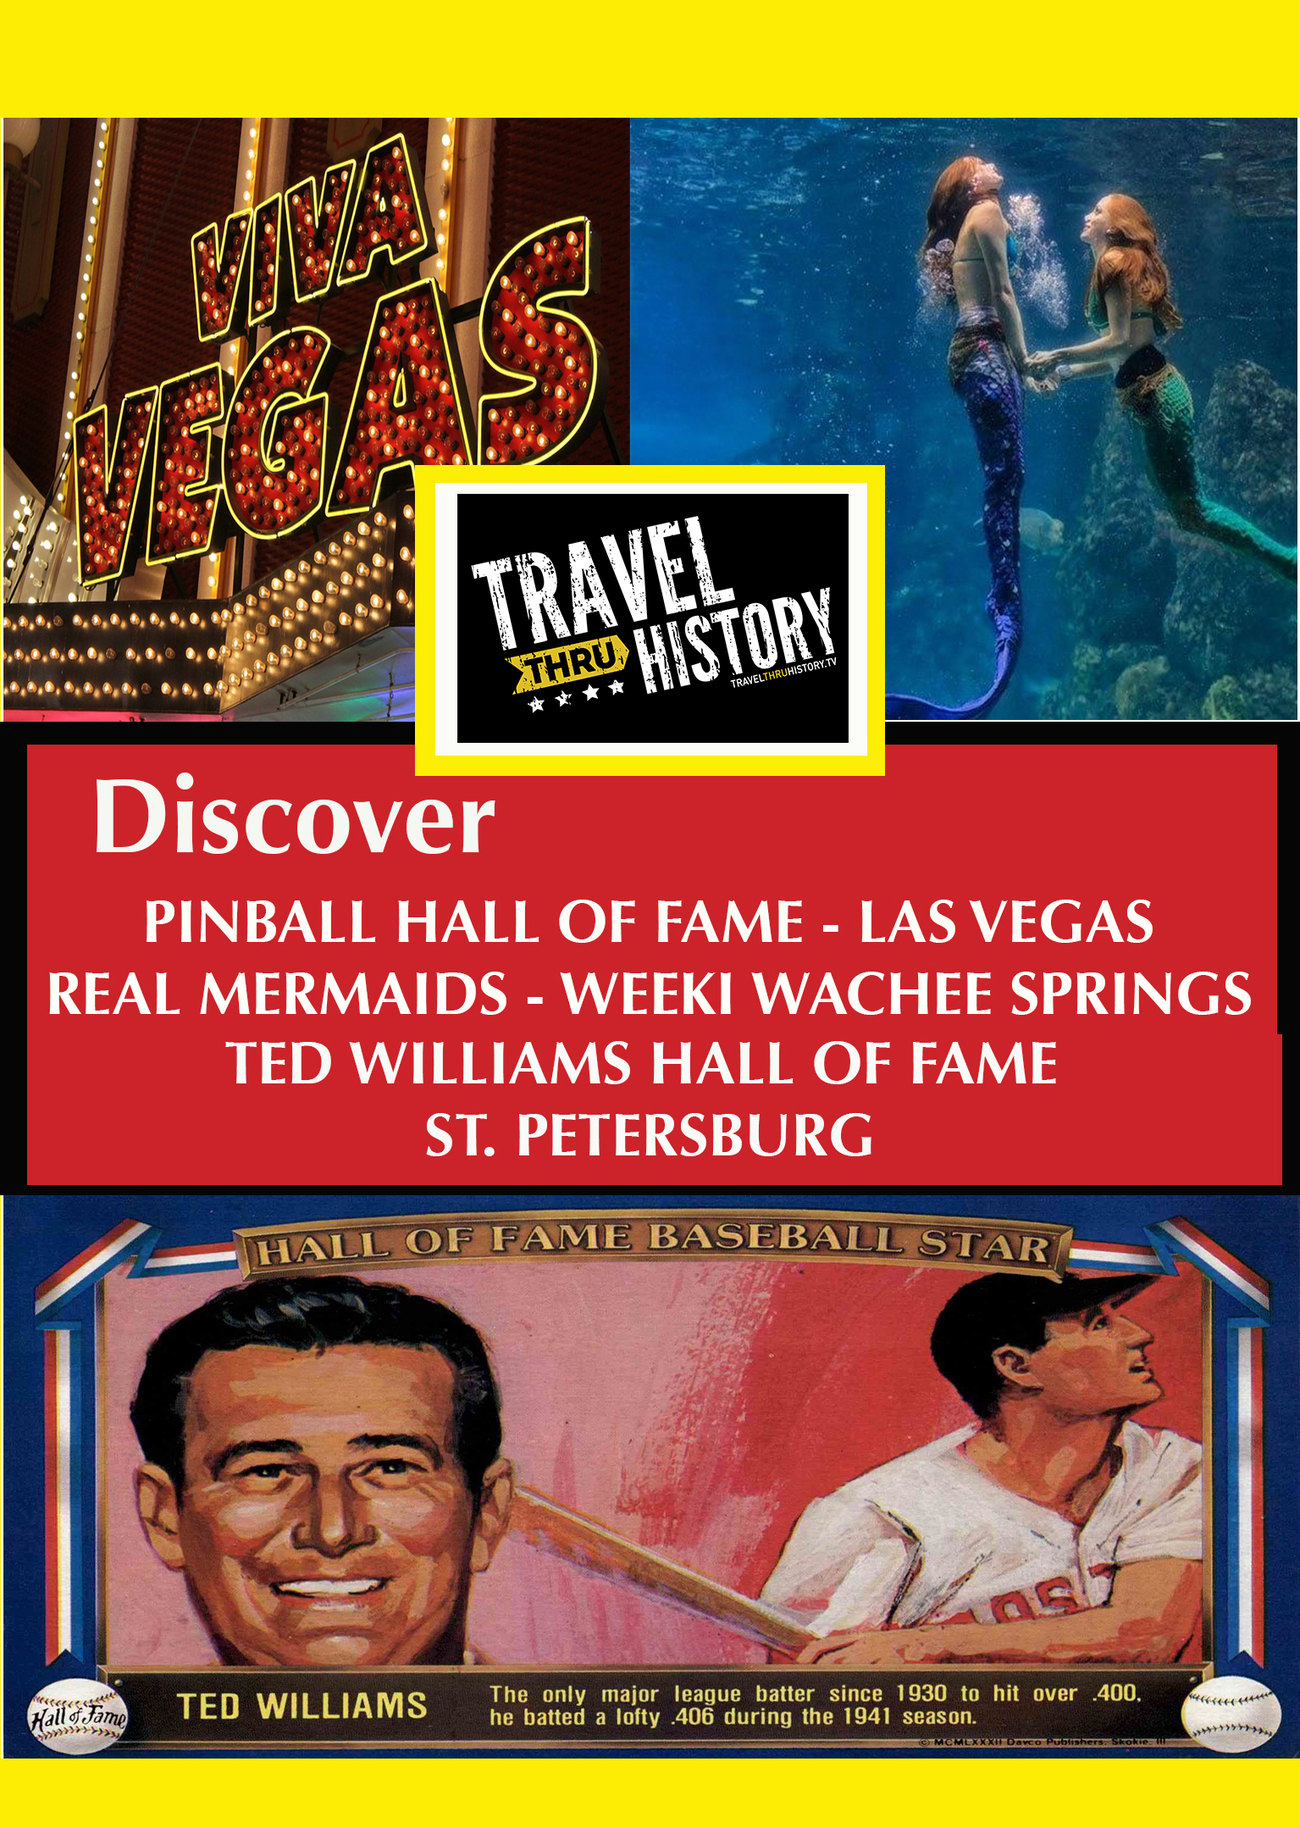 T8971 - Odds and Ends: Pinball Hall of Fame Museum - Las Vegas, Real Mermaids - Weeki Wachee Springs, Ted Williams Hitters Hall of Fame, St. Petersburg